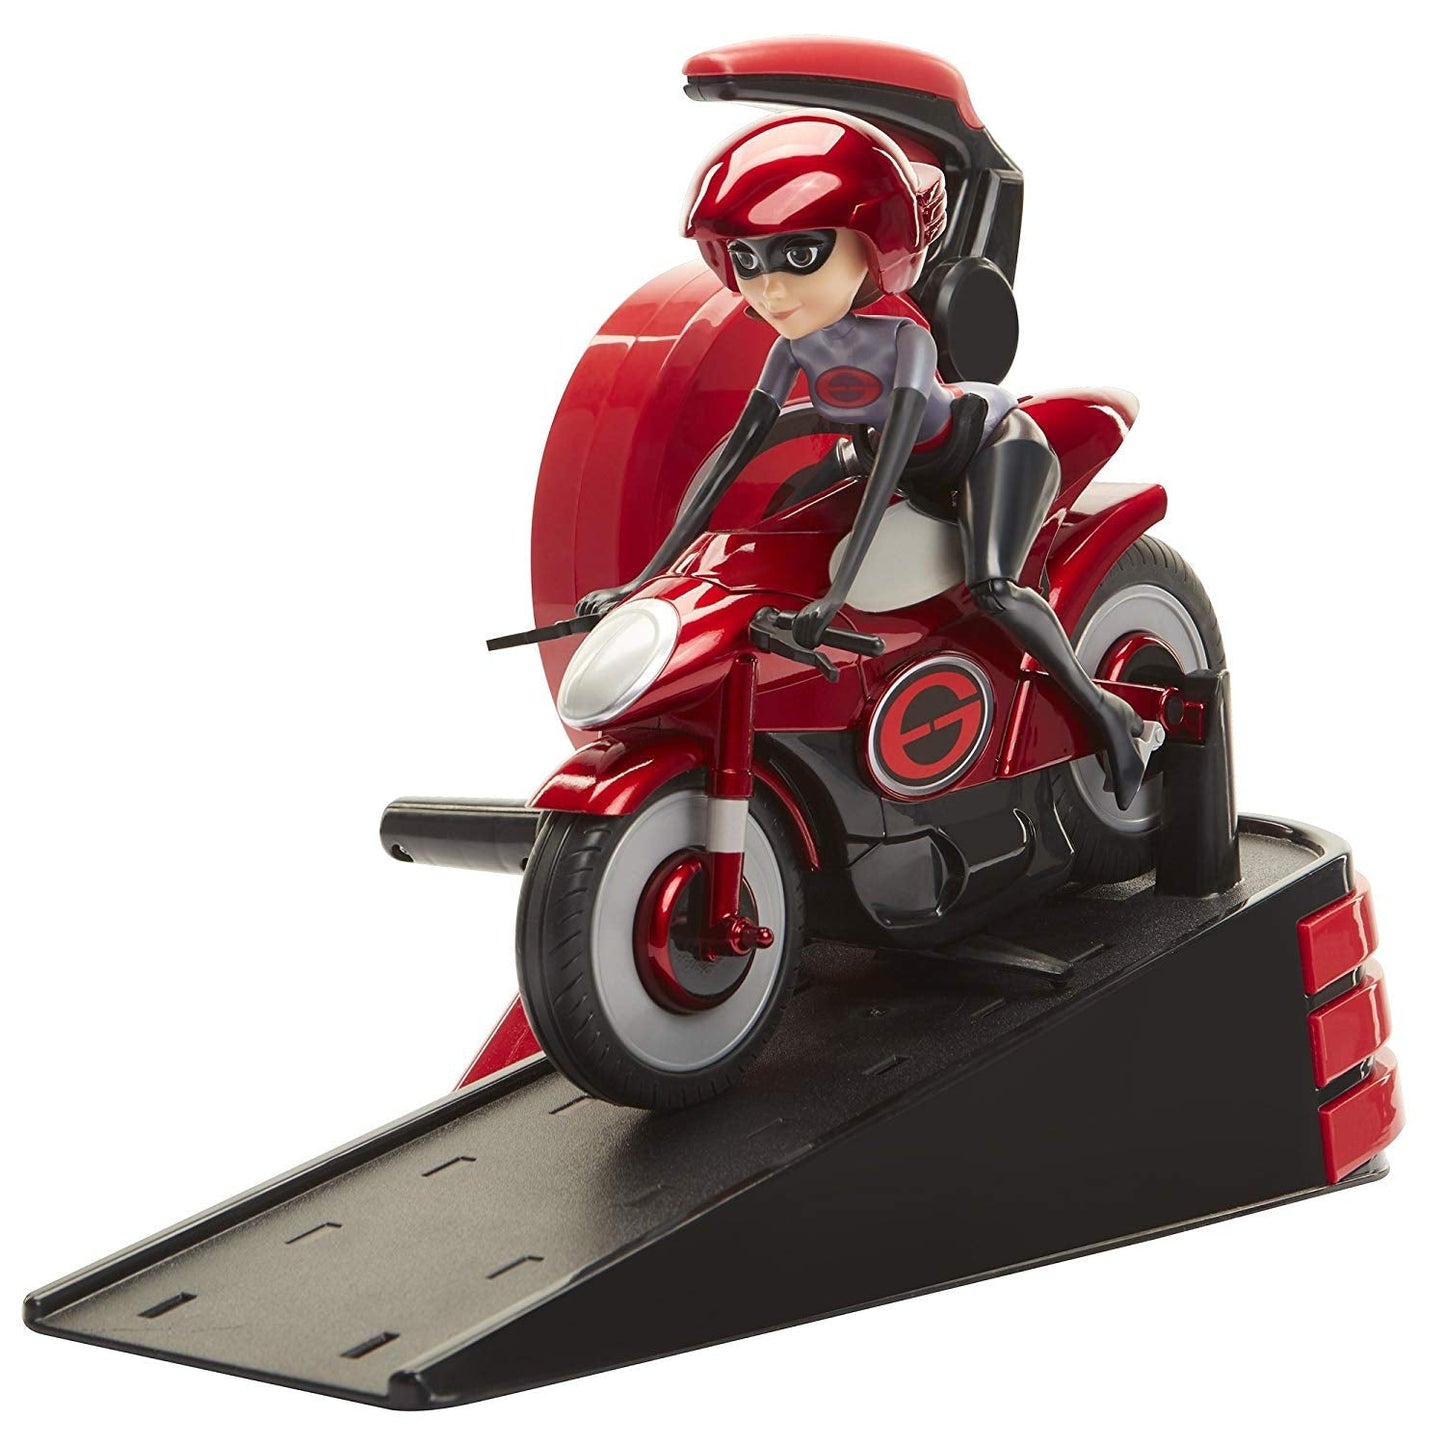 The Incredibles 2 Stretching & Speeding Elasticycle Playset with Removable Elastigirl Figure